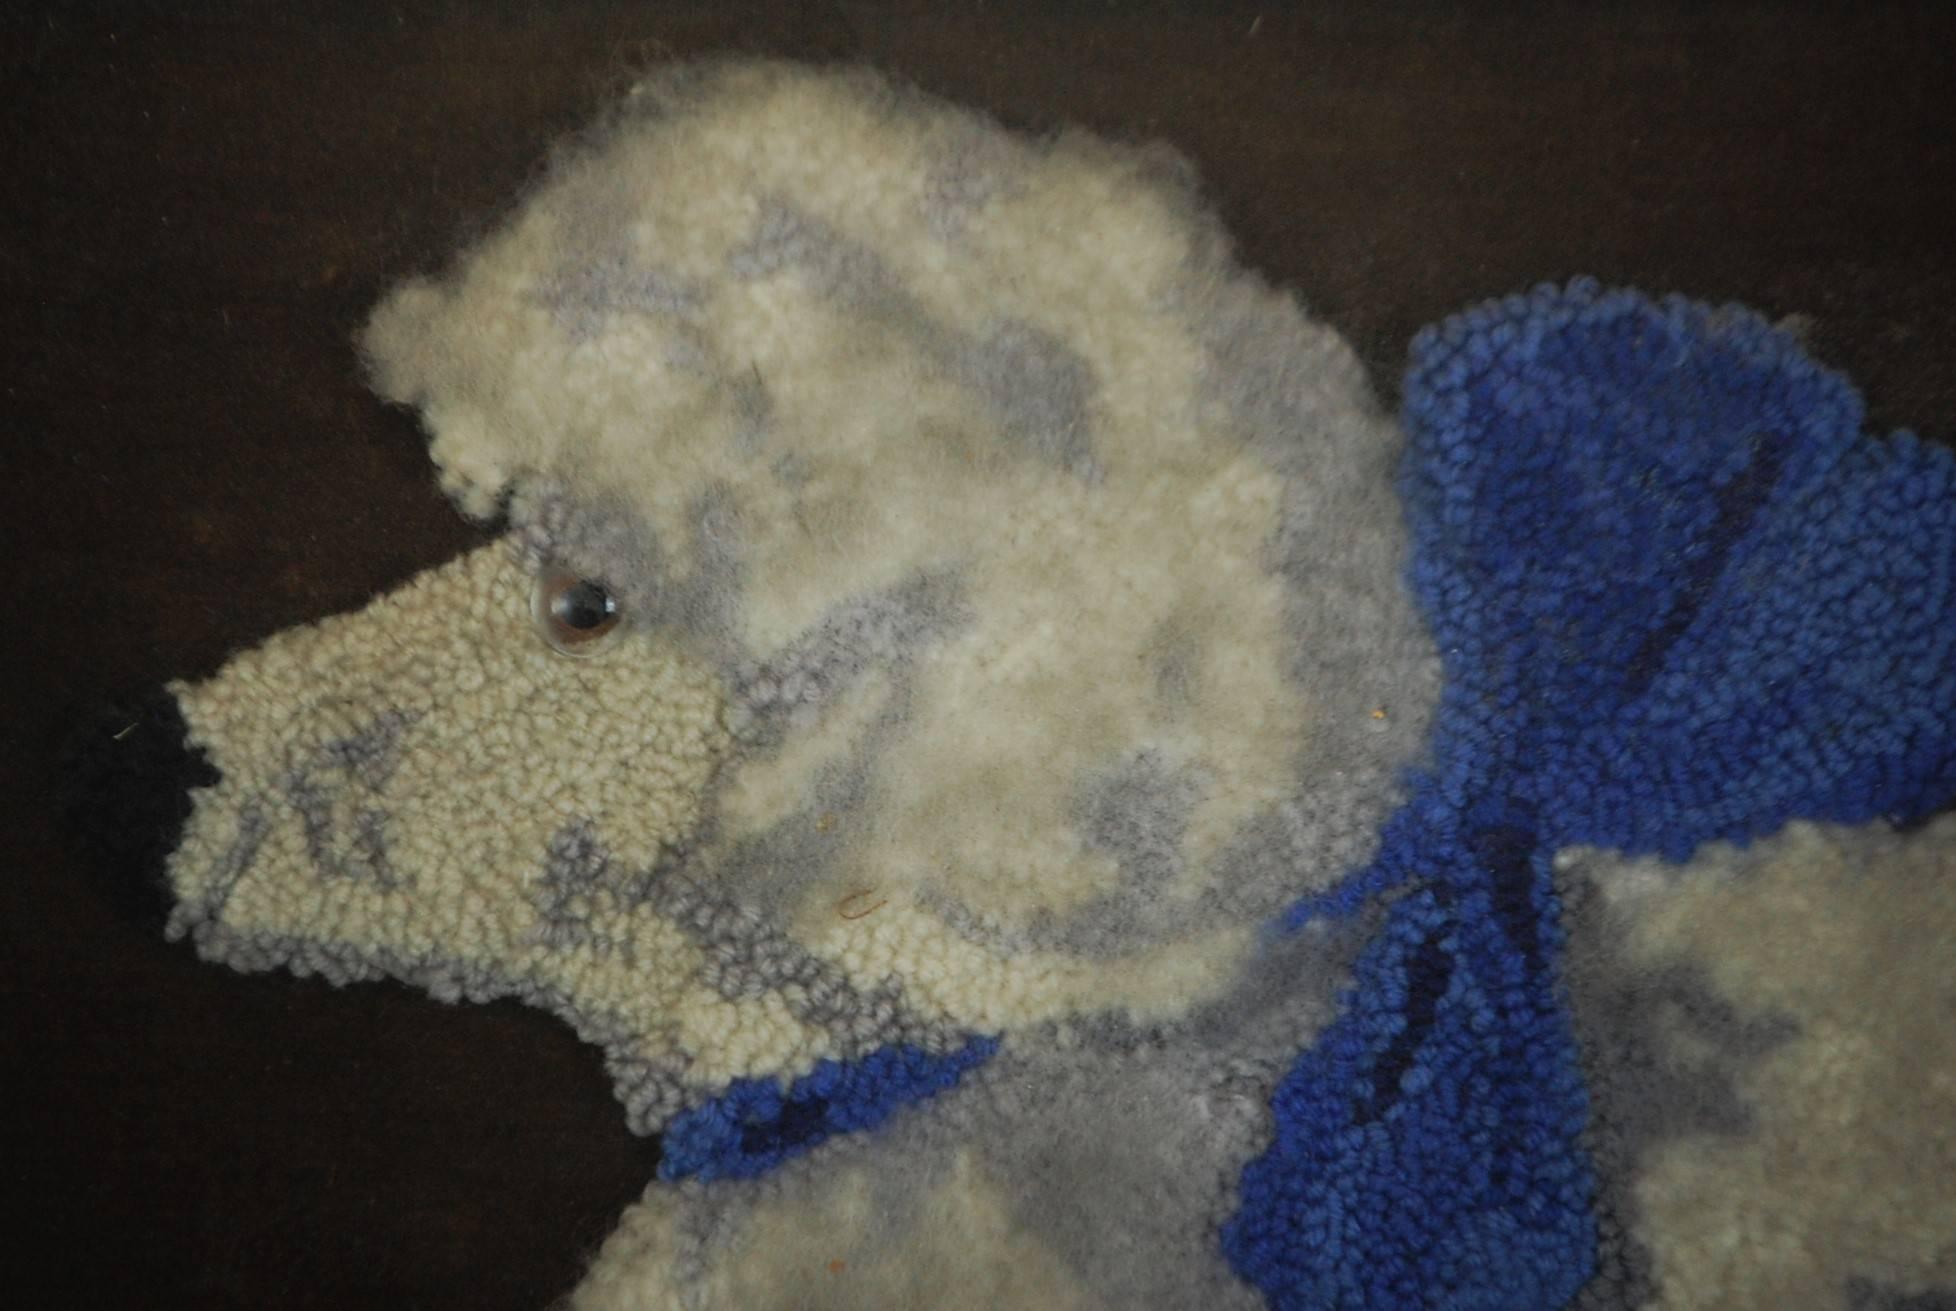 Late 19th century, Victorian unusual wool work depicting a French poodle on velvet. Wonderful execution and detail complete with glass eye, presumably a beloved pet.